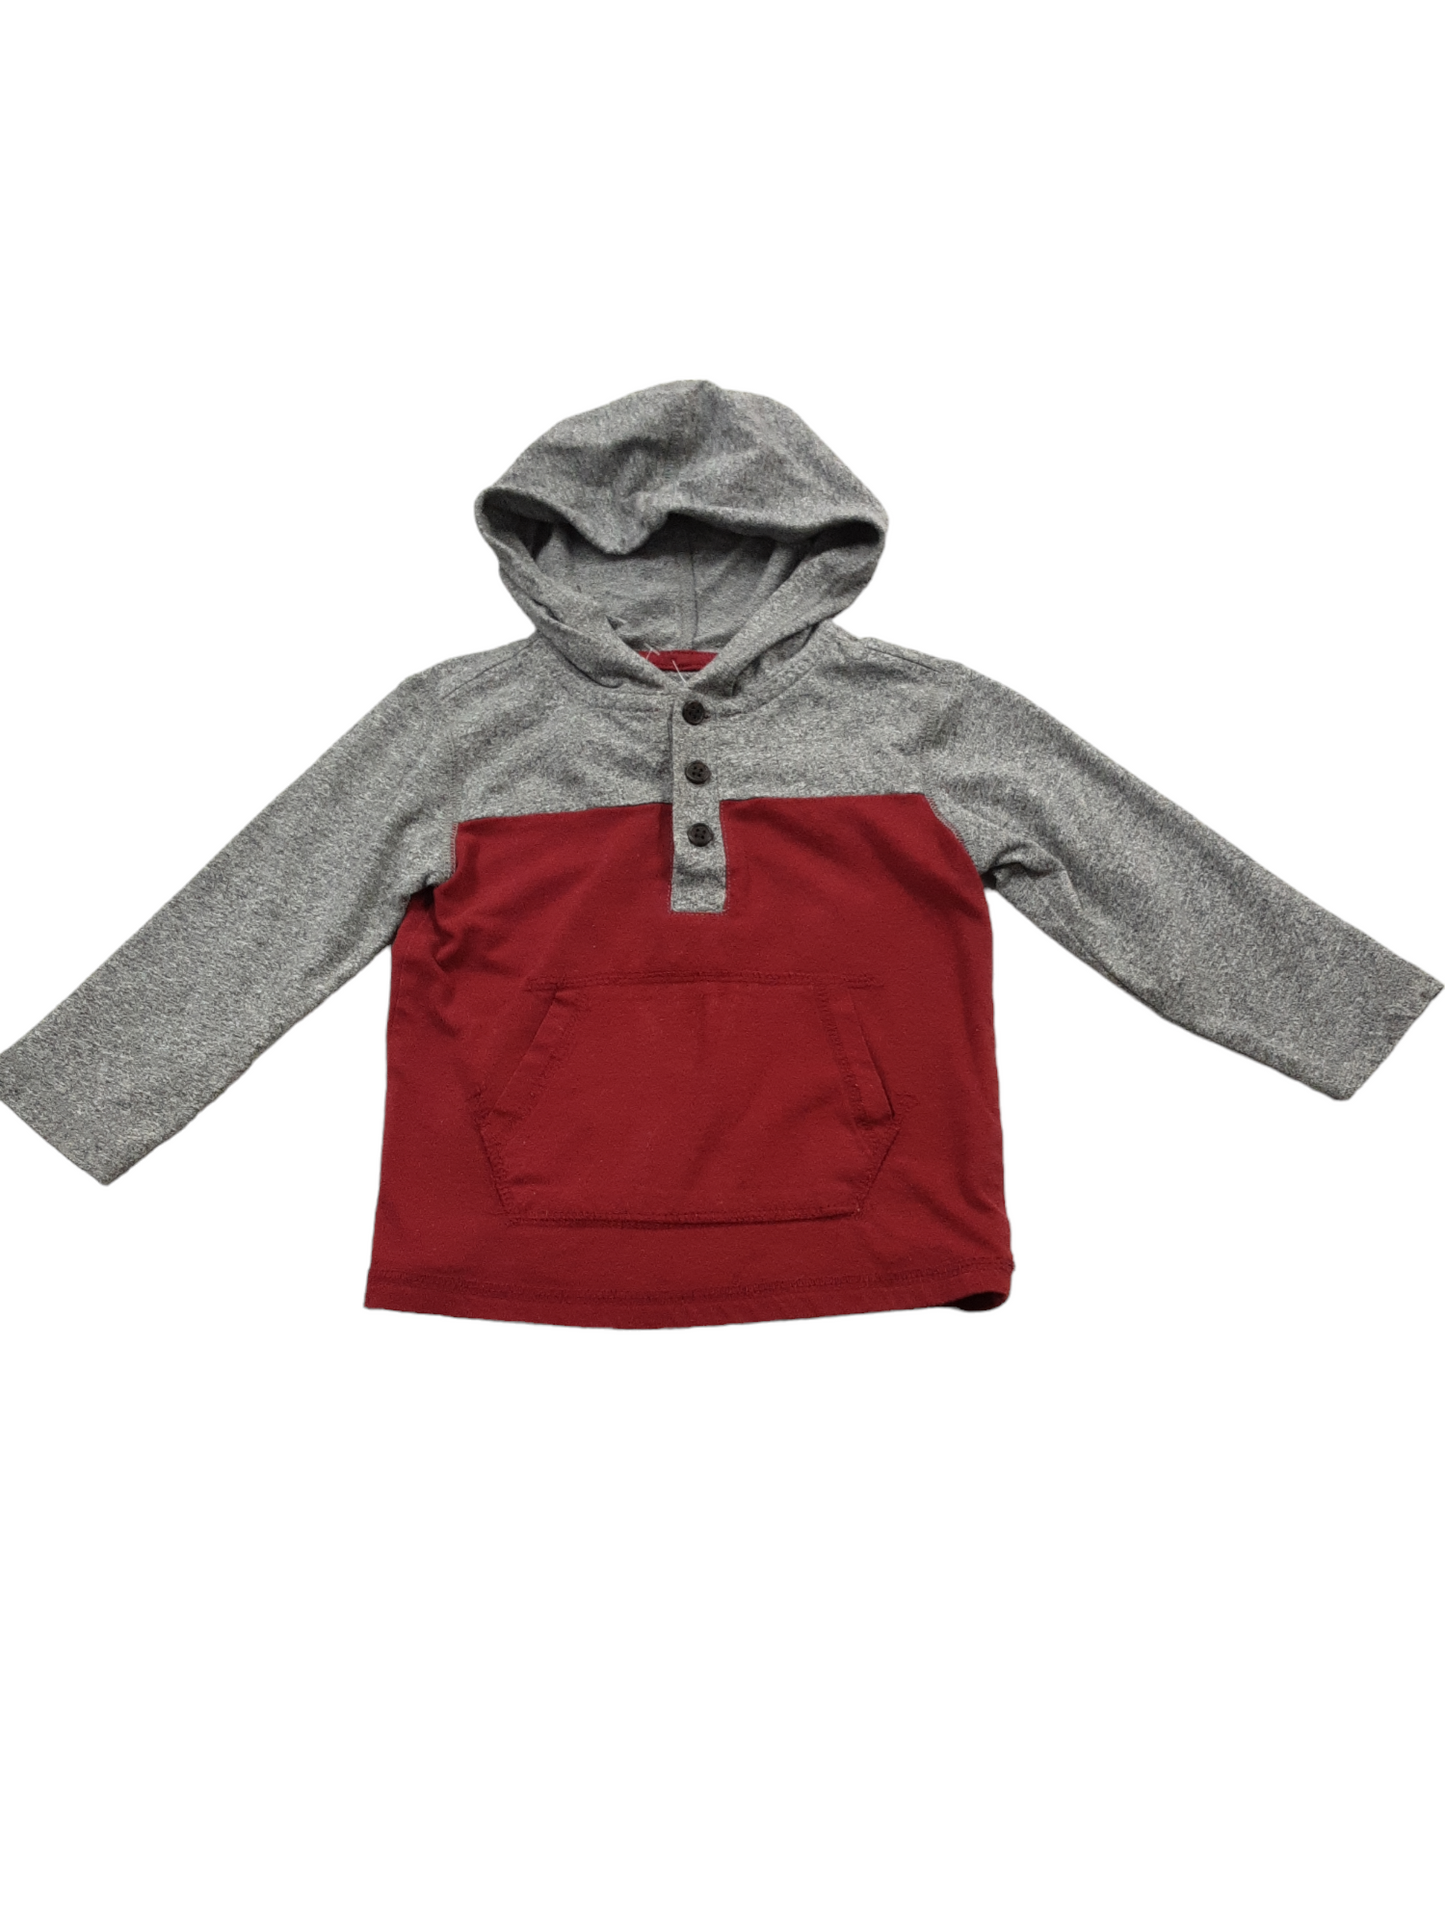 Grey and burgundy hooded top size 2